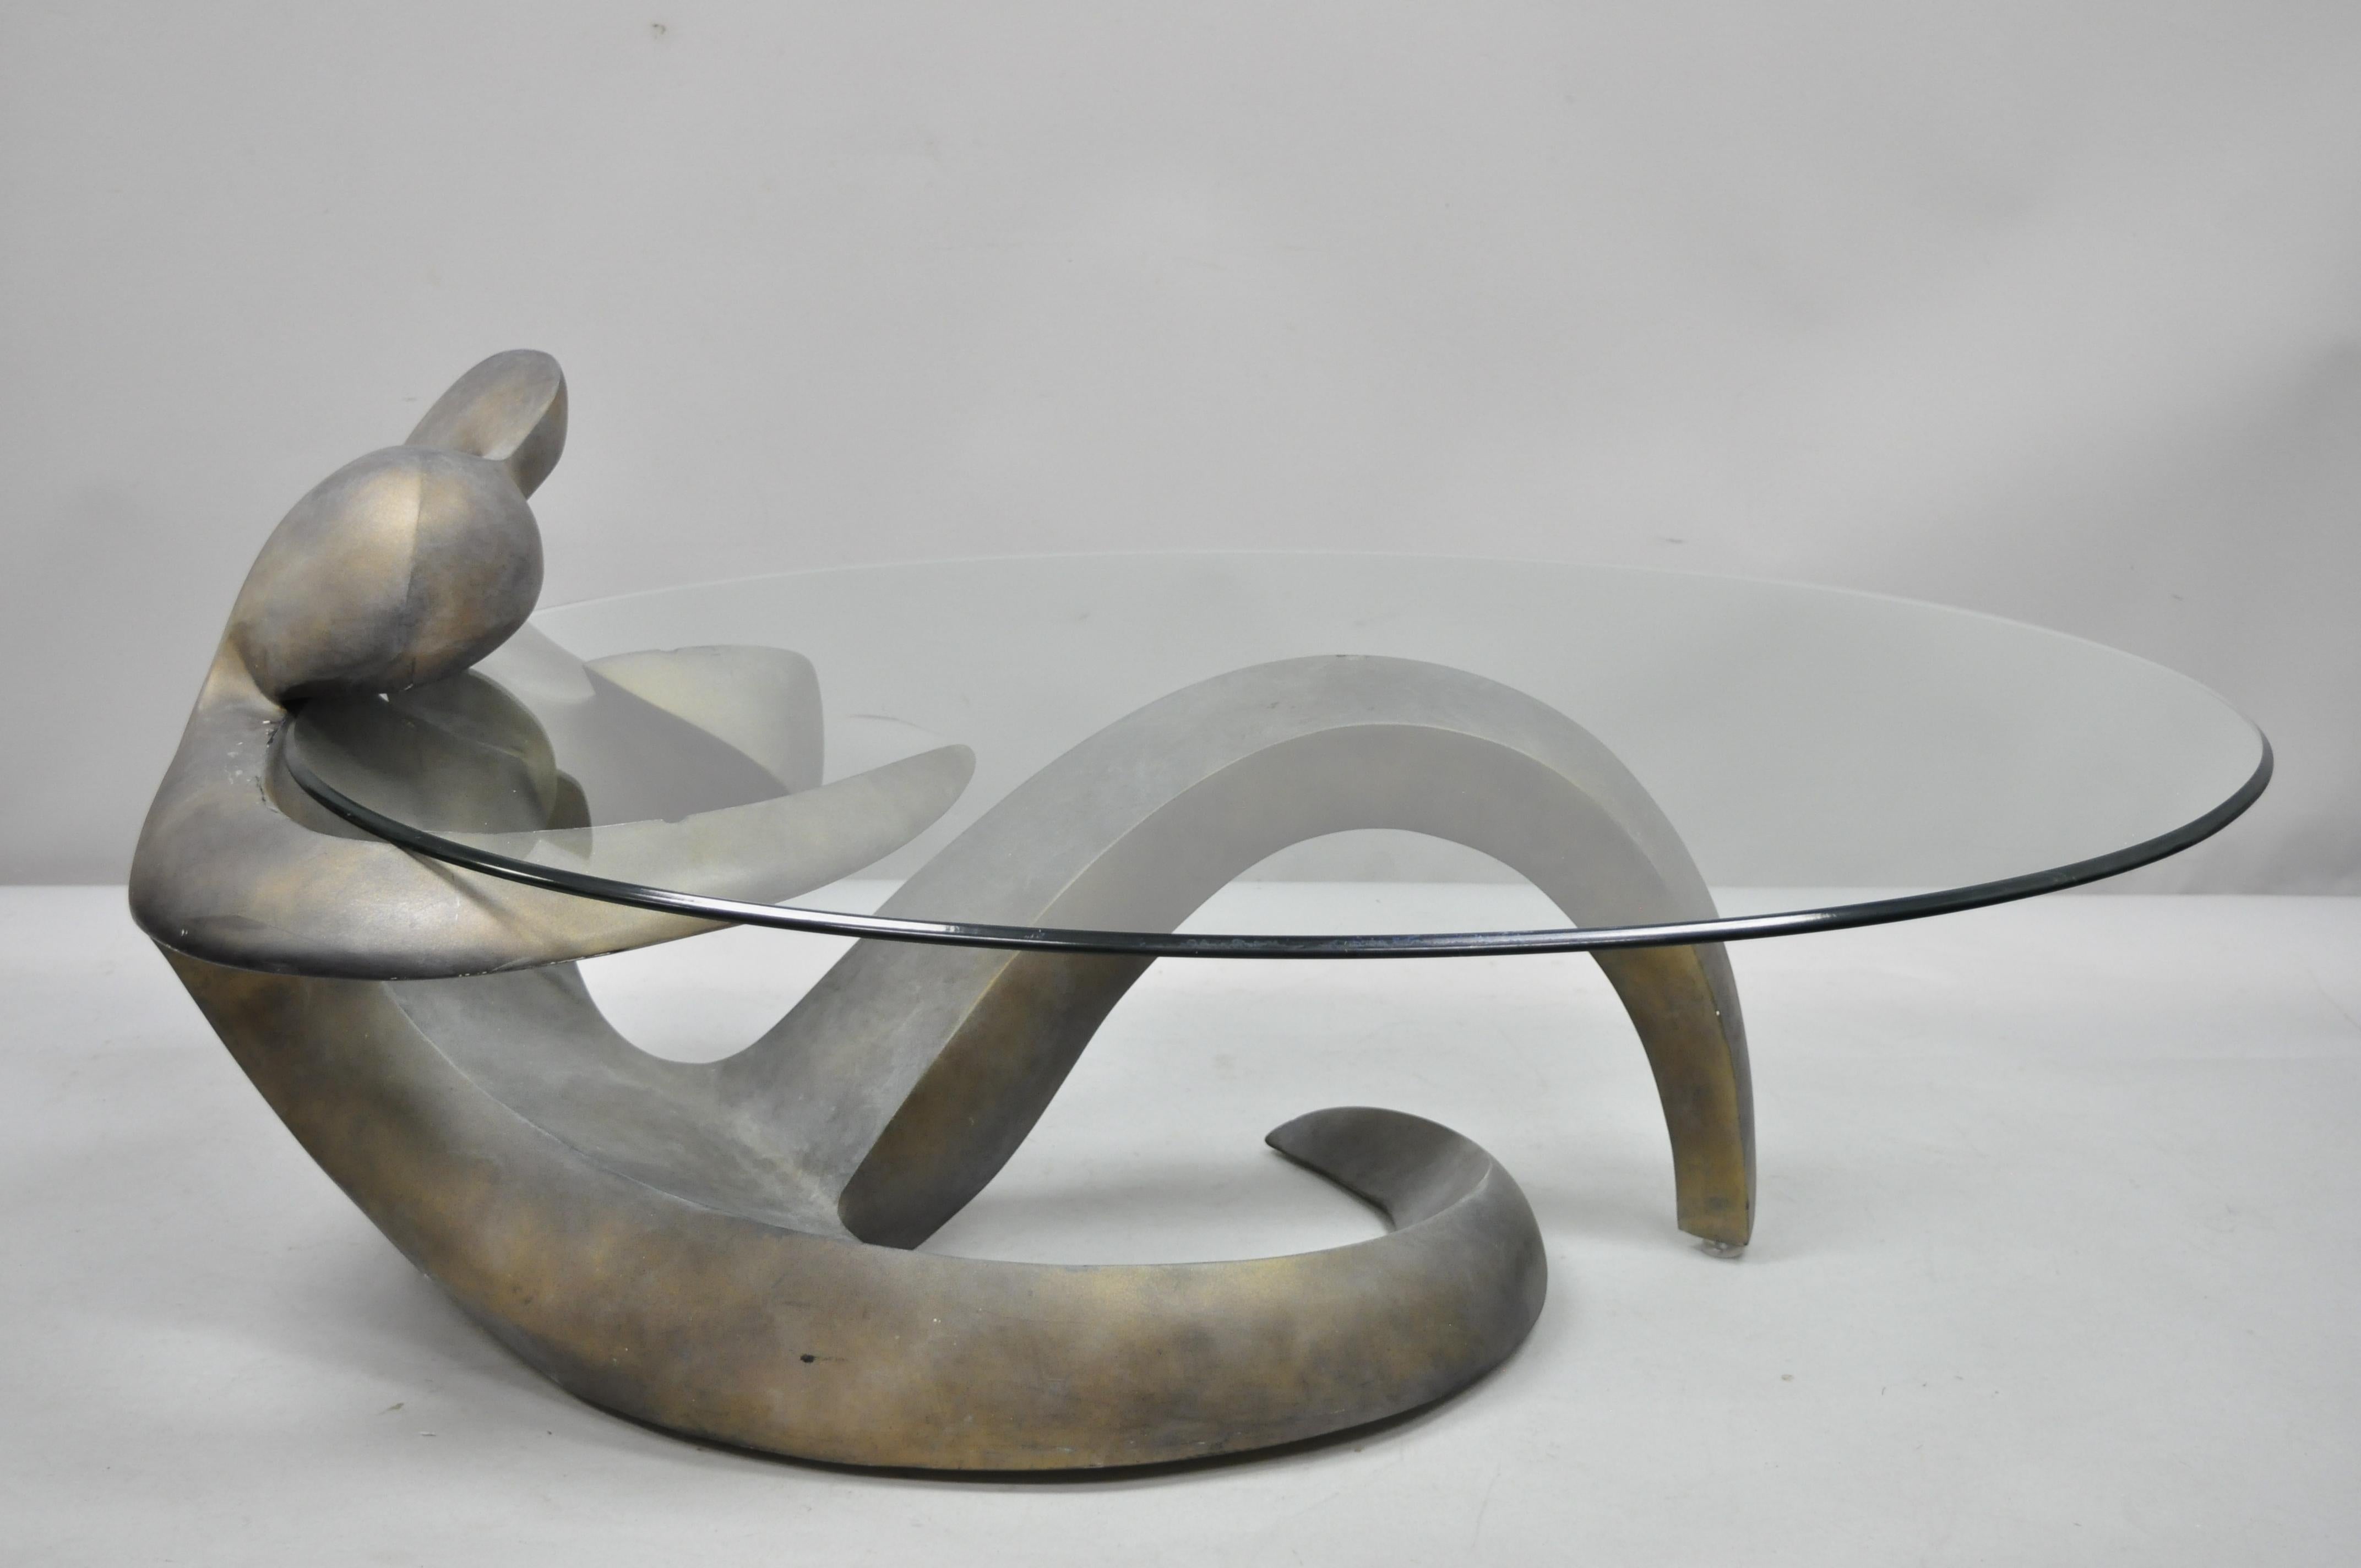 Vintage Mid-Century Modern Picasso style figural female oval glass top coffee table. Item features a sculptural woman form composition base, thick beveled oval glass cantilever style top, gray finish, sleek sculptural form, heavy substantial weight,